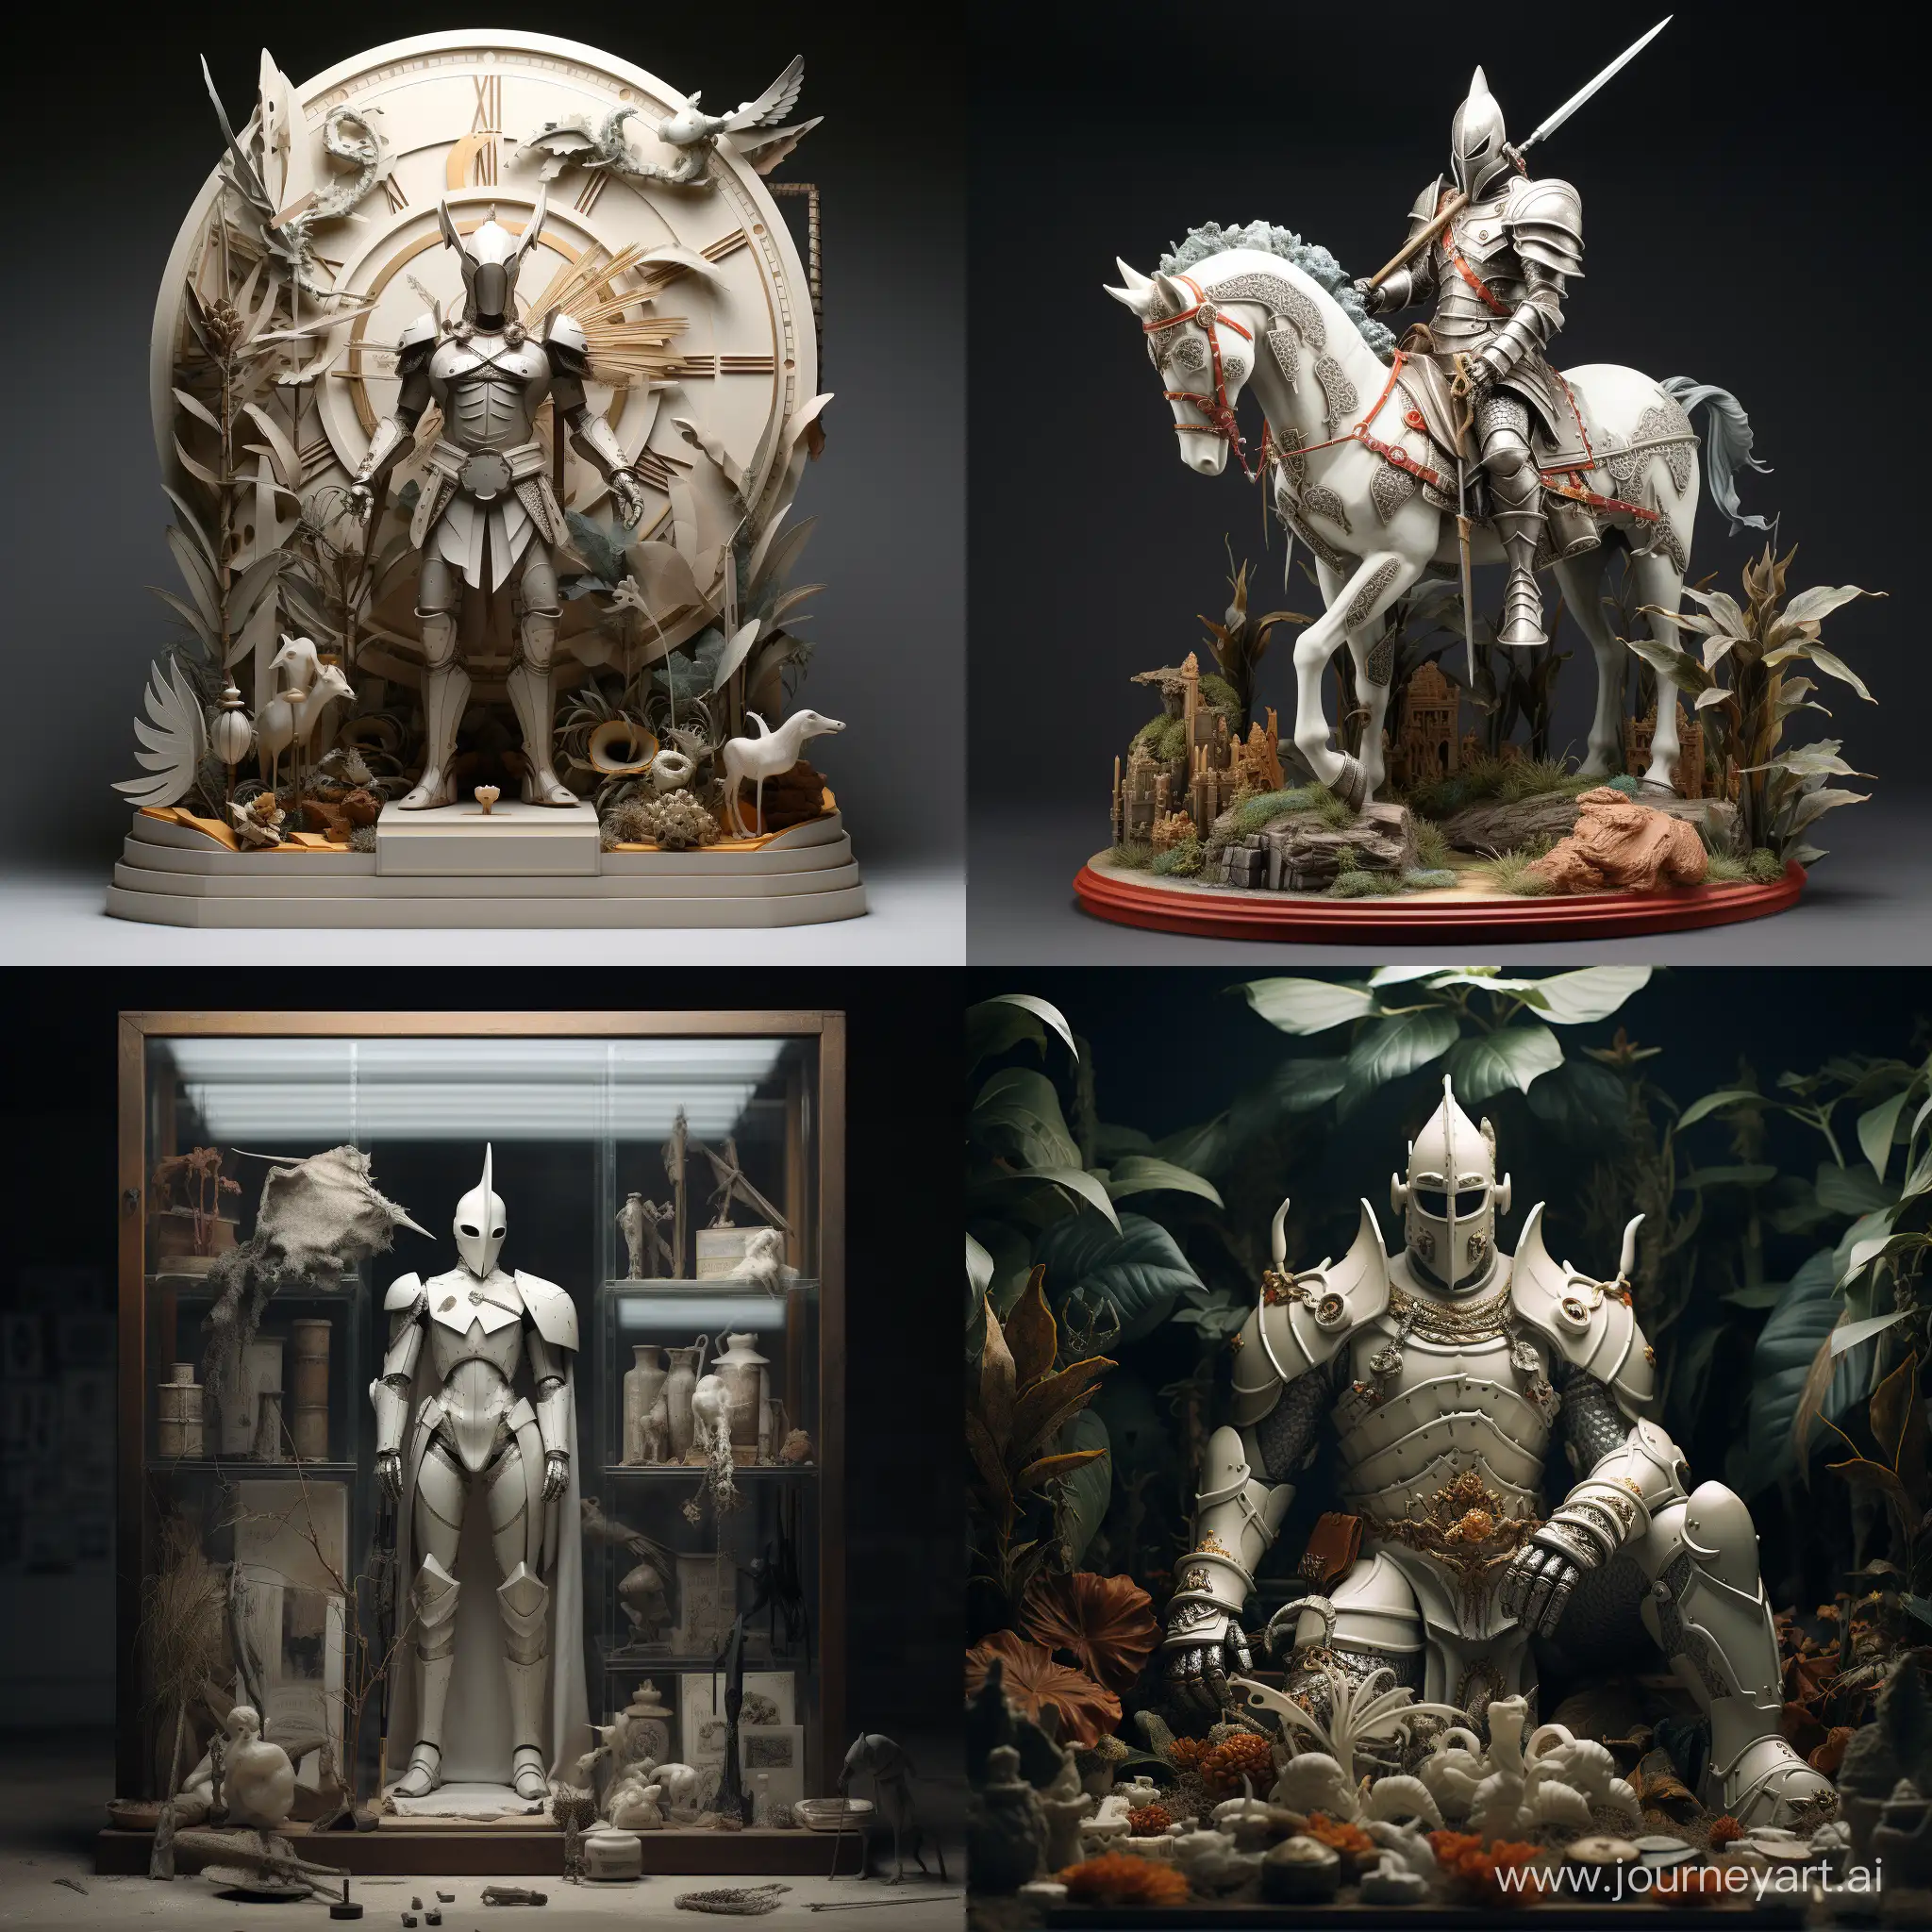 Enchanting-Diorama-Featuring-a-Noble-White-Knight